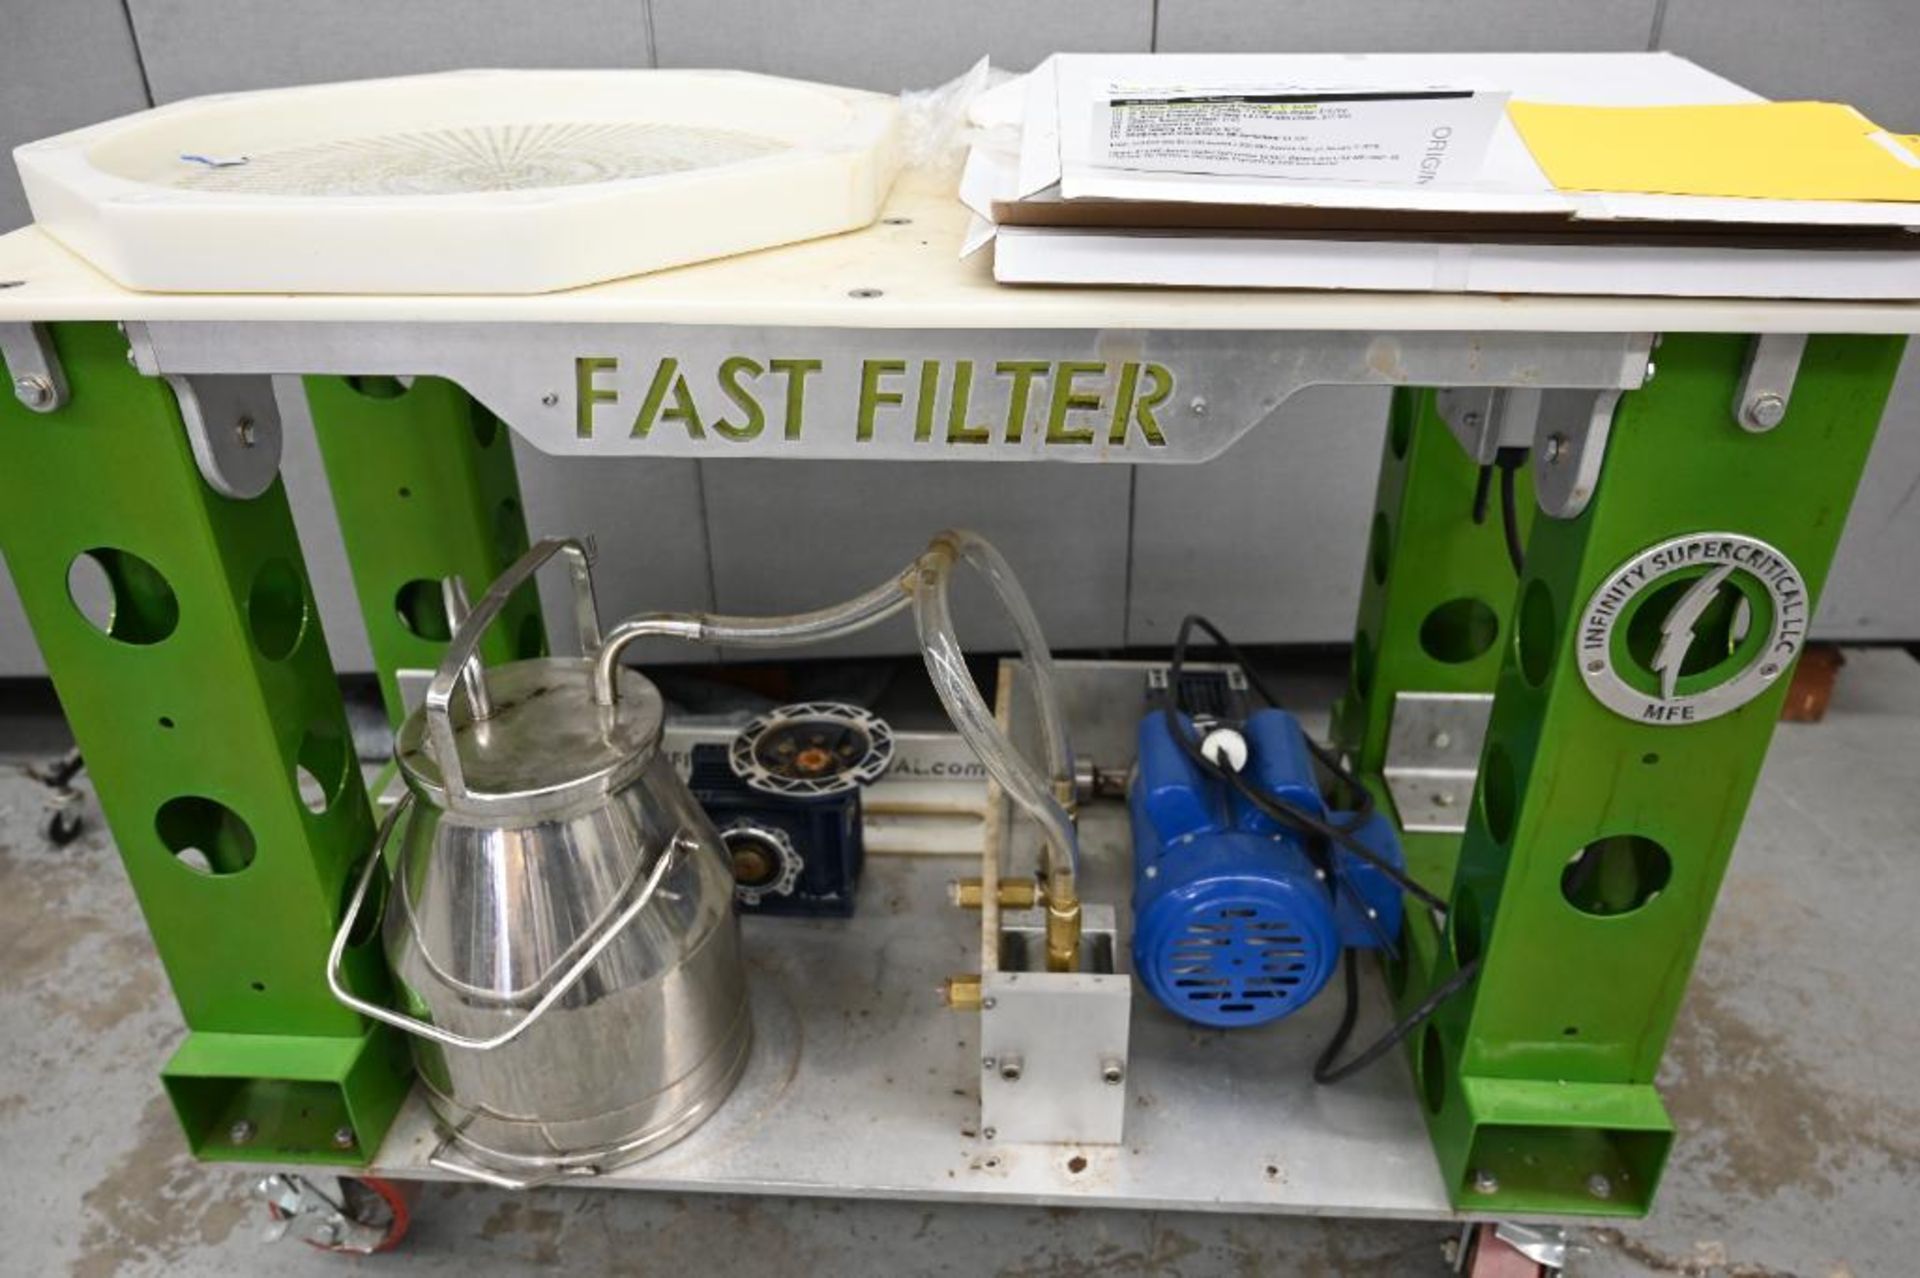 Infinity Super Critical 5 Liter Fast Filter System - Image 7 of 14